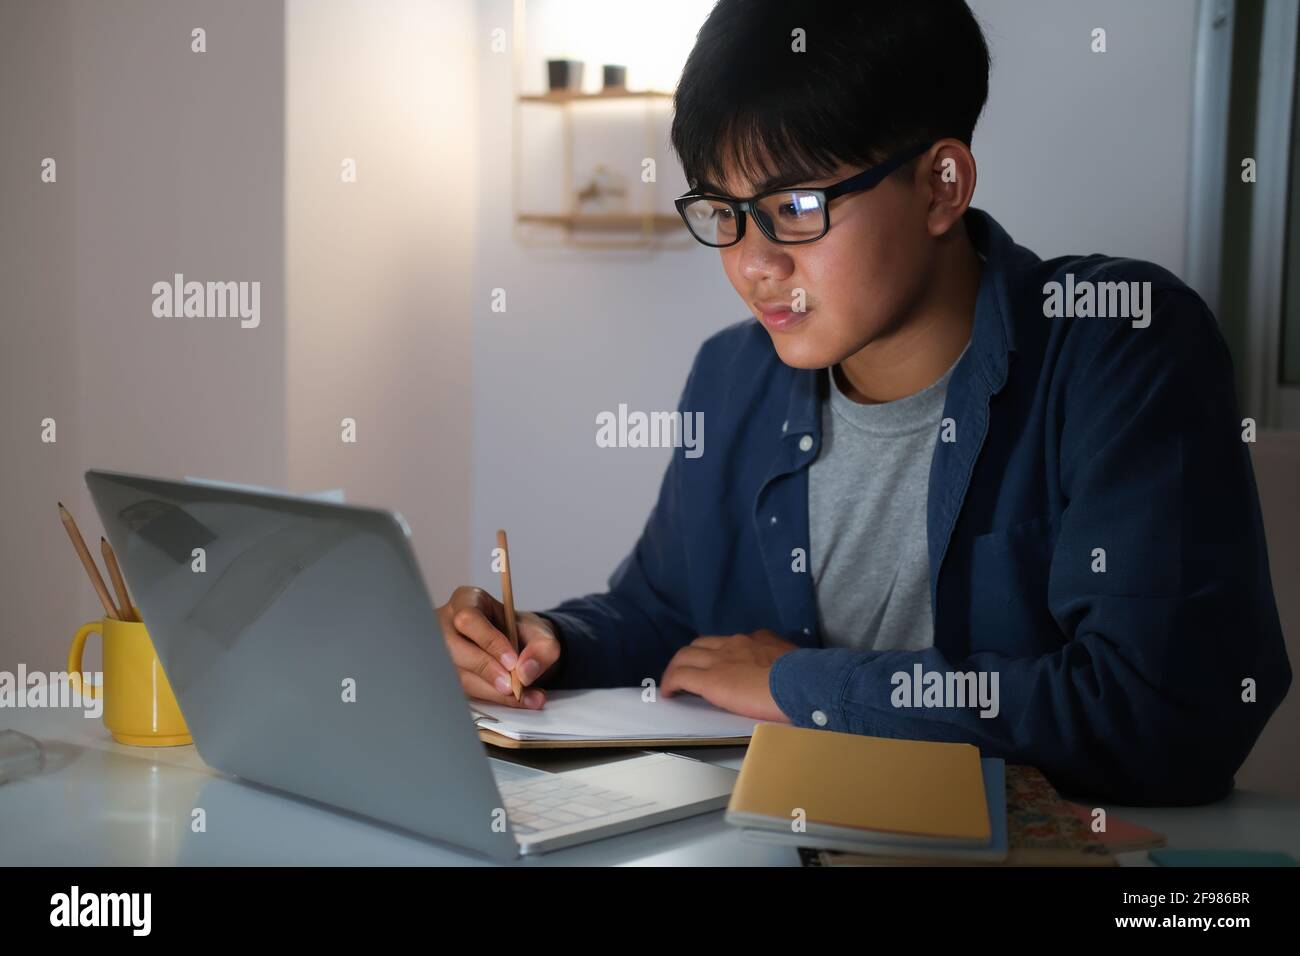 Young collage man learning online at night at his home. Stock Photo